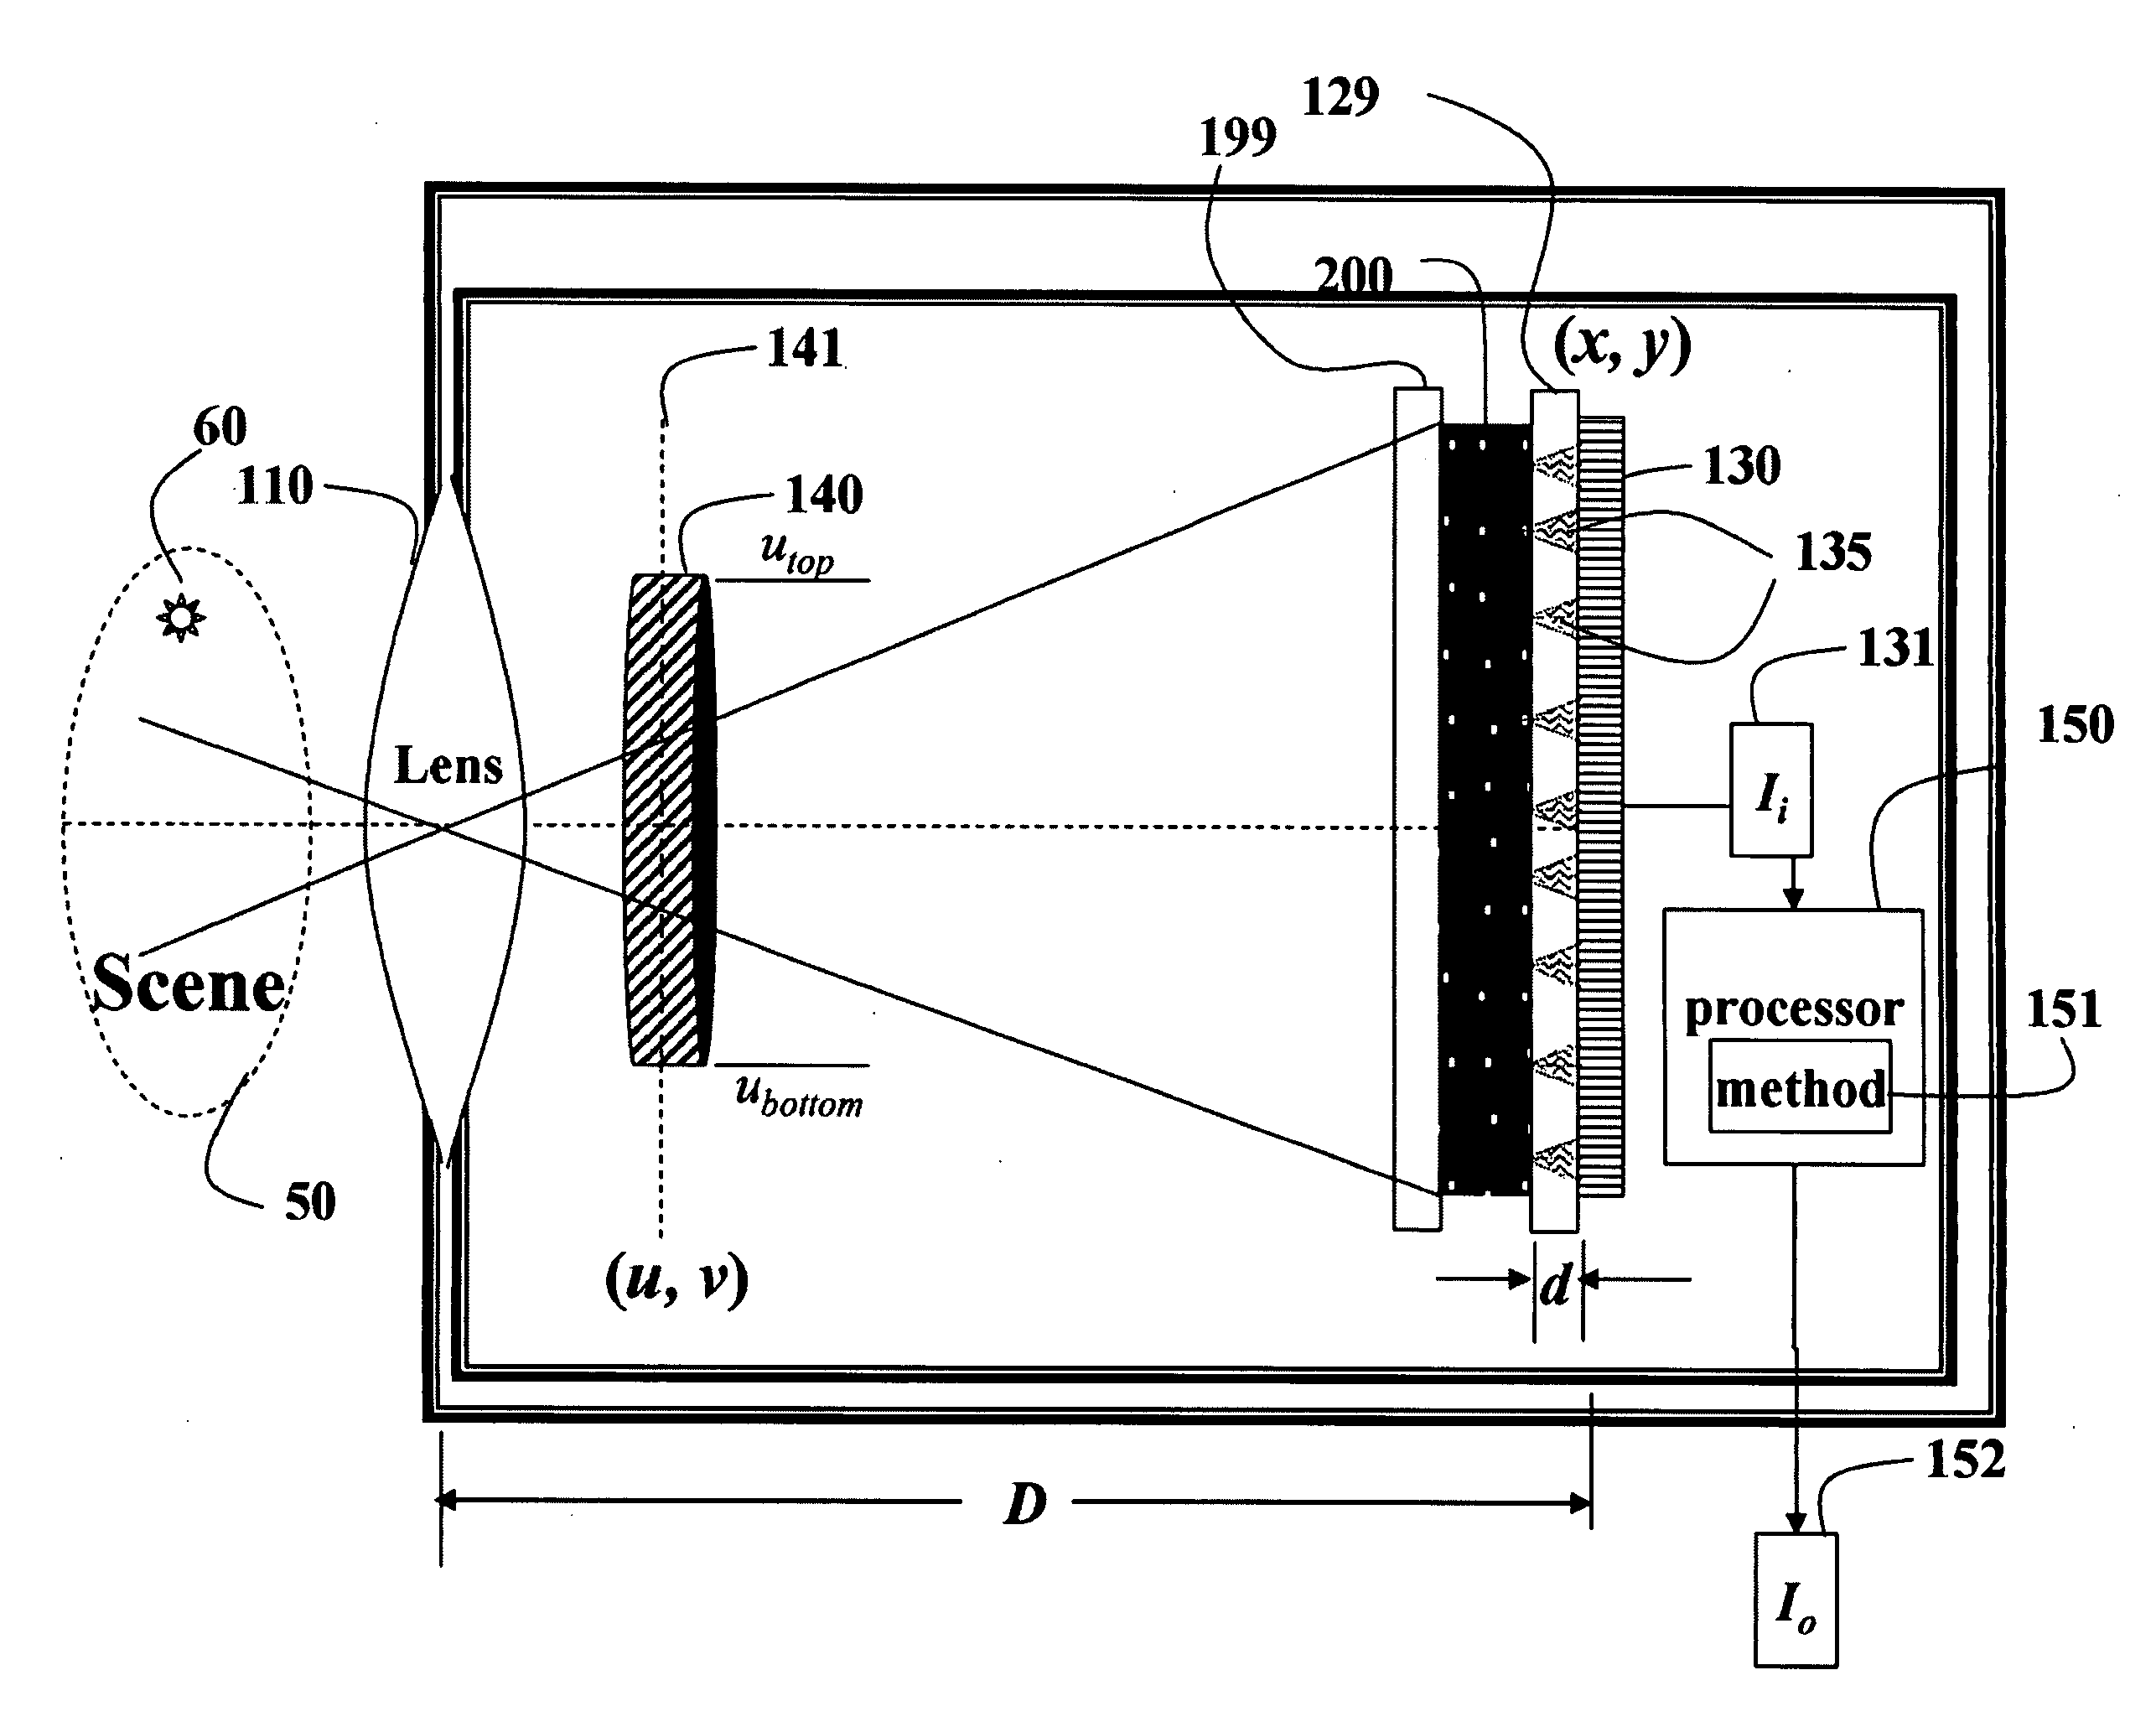 Apparatus and Method for Reducing Glare in Images